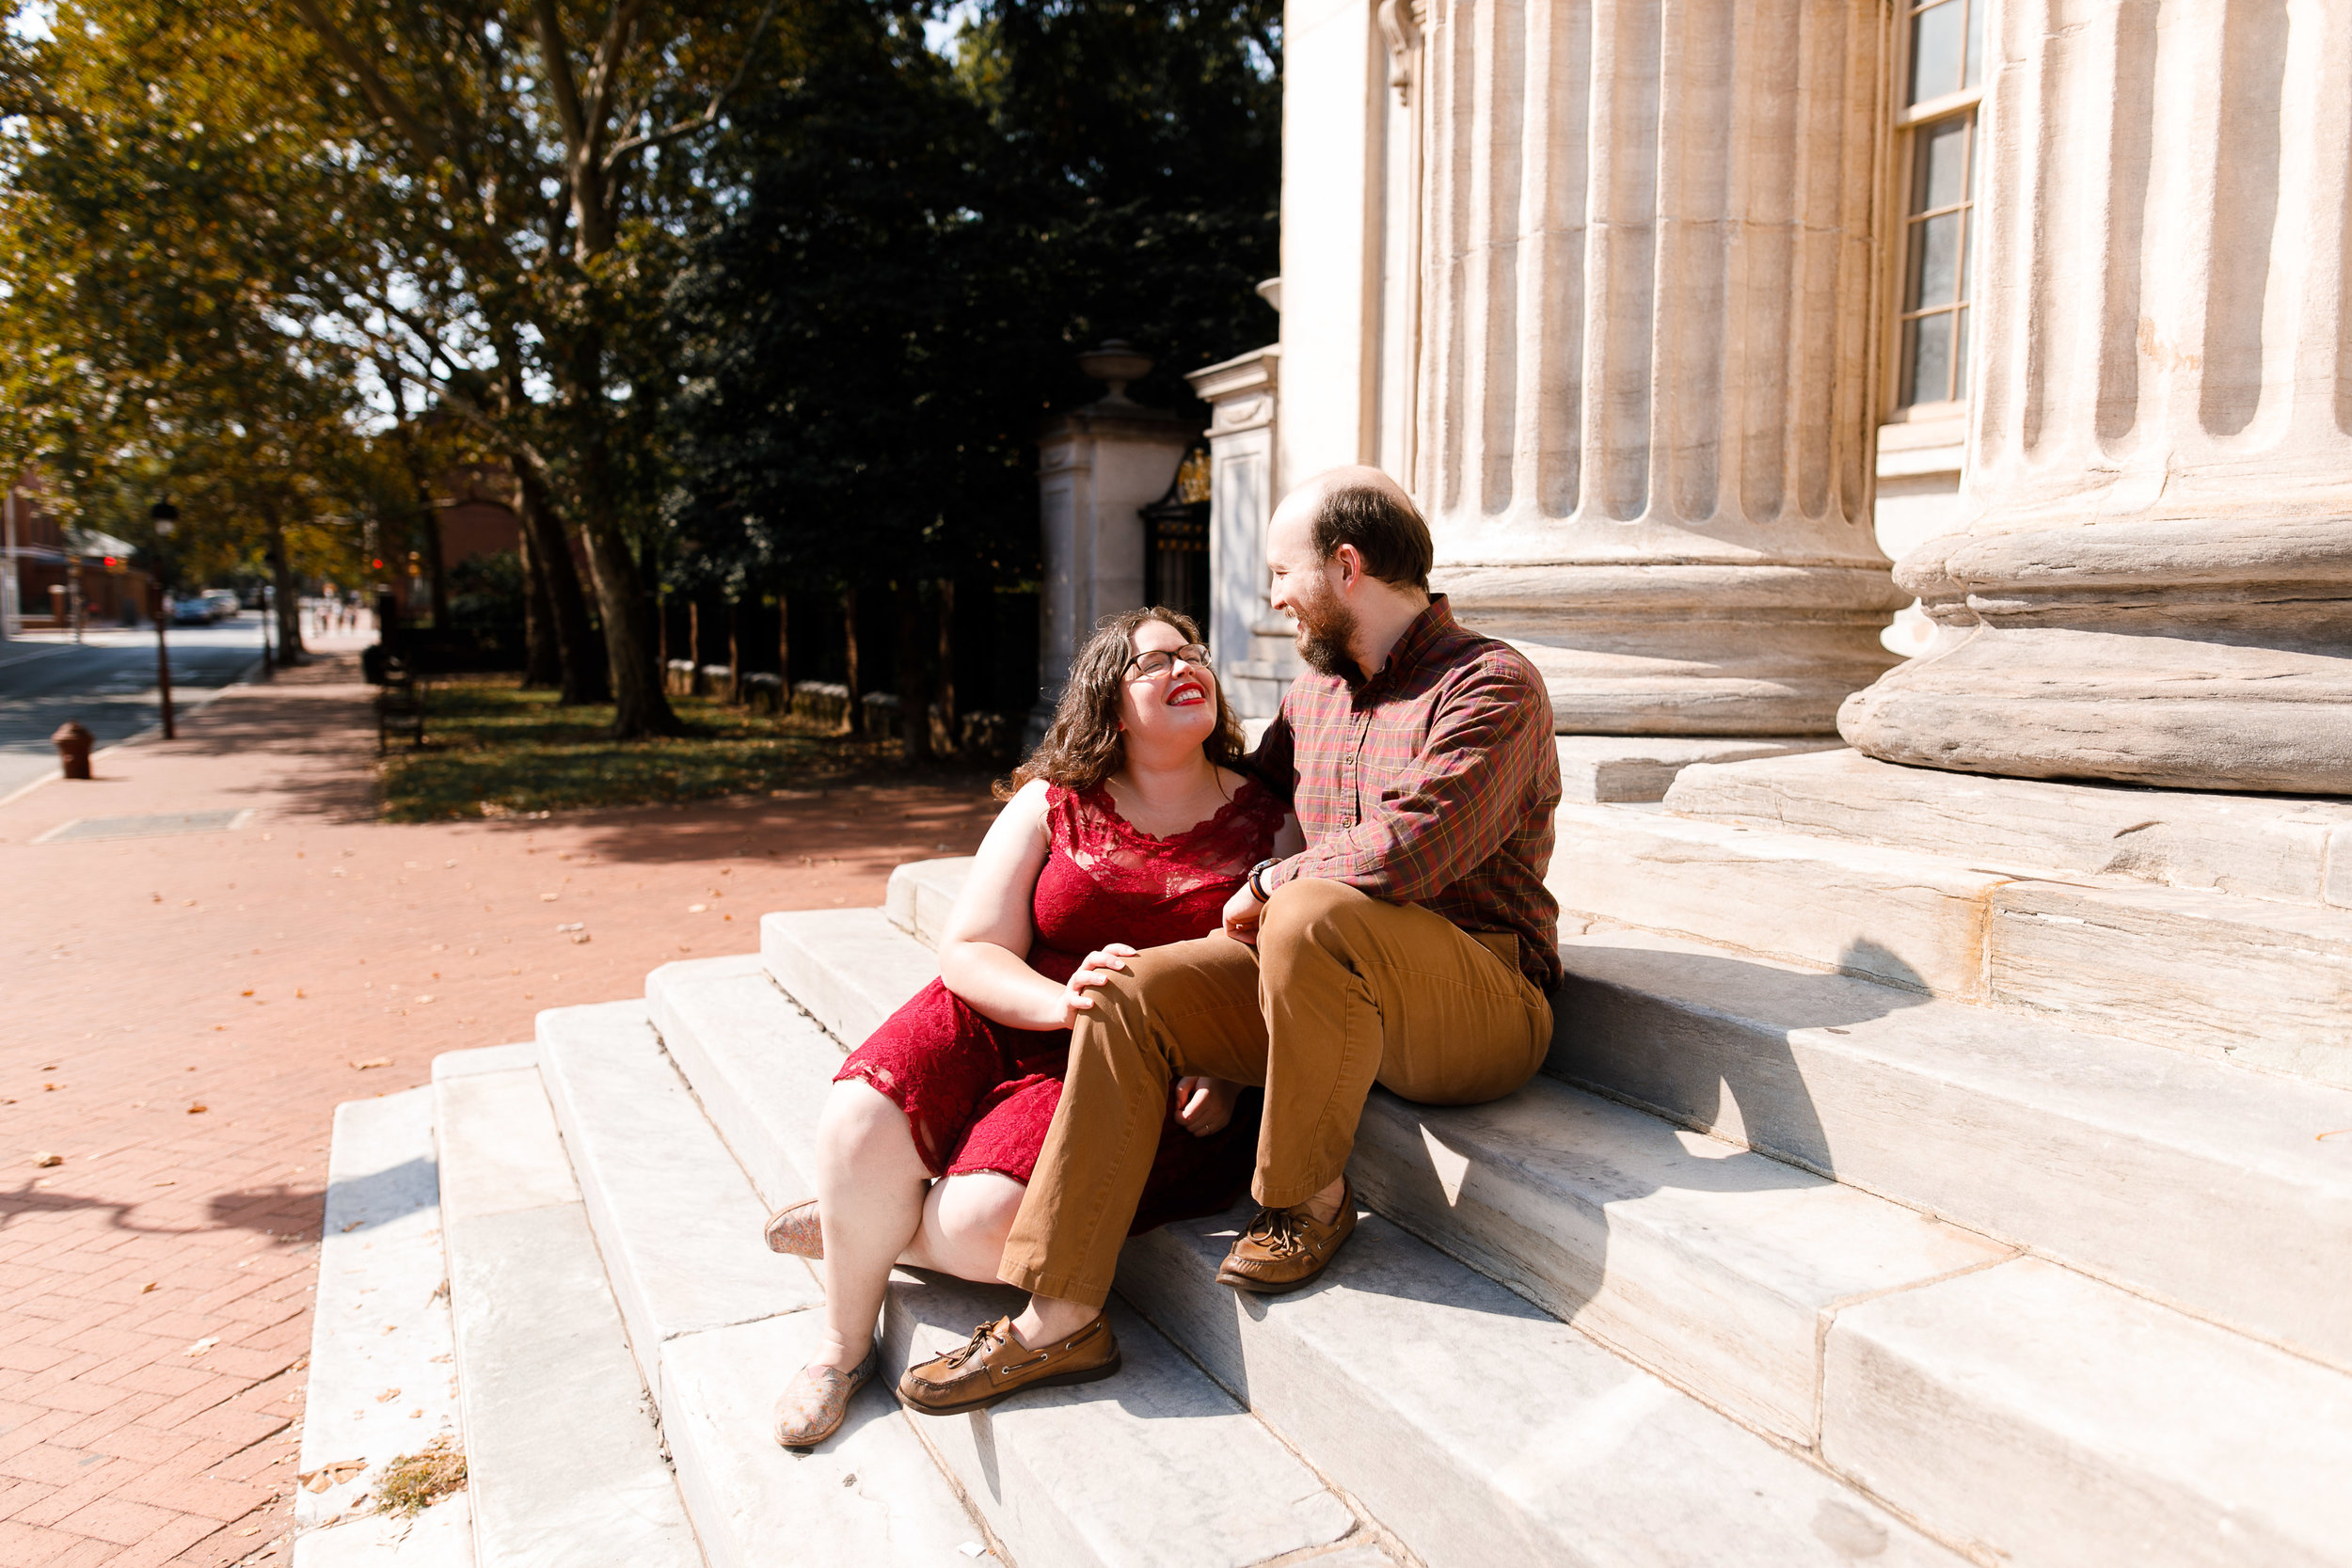 D&A Old City Philly Couples Session Photo Location Ideas 27.jpg